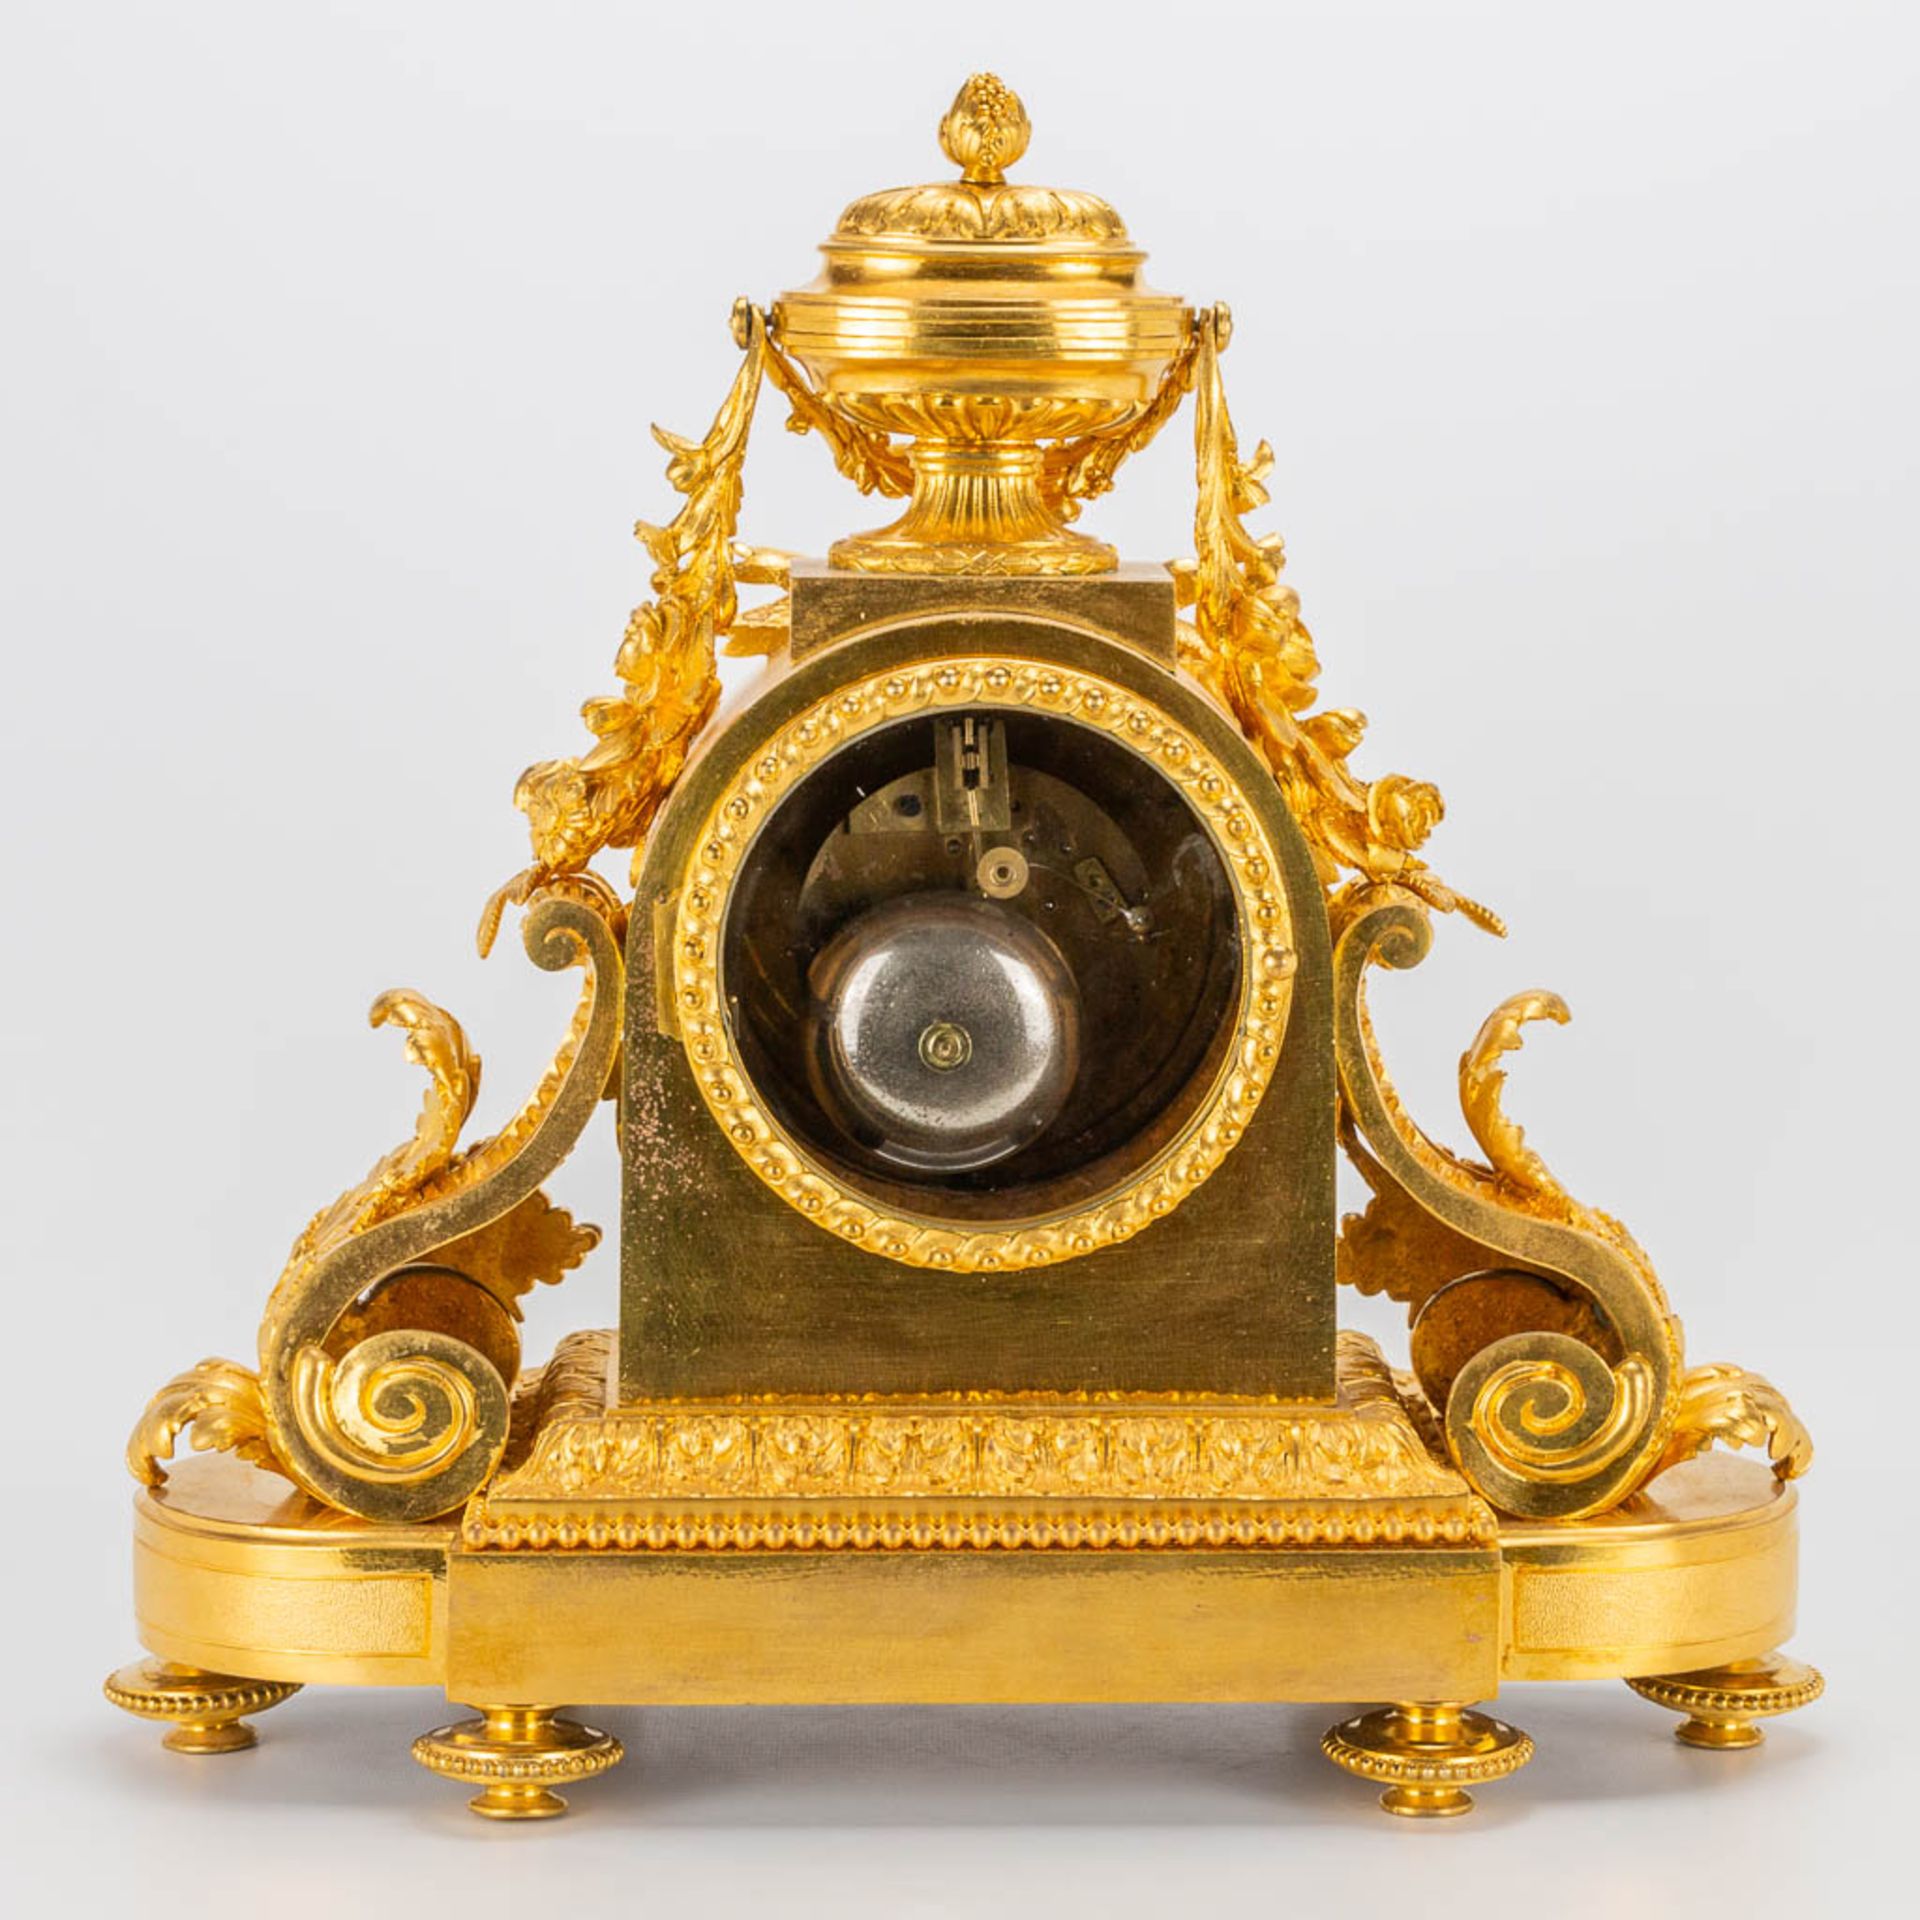 A bronze ormolu table clock made in Louis XVI style. 19th century. (15 x 41 x 42 cm) - Image 10 of 20